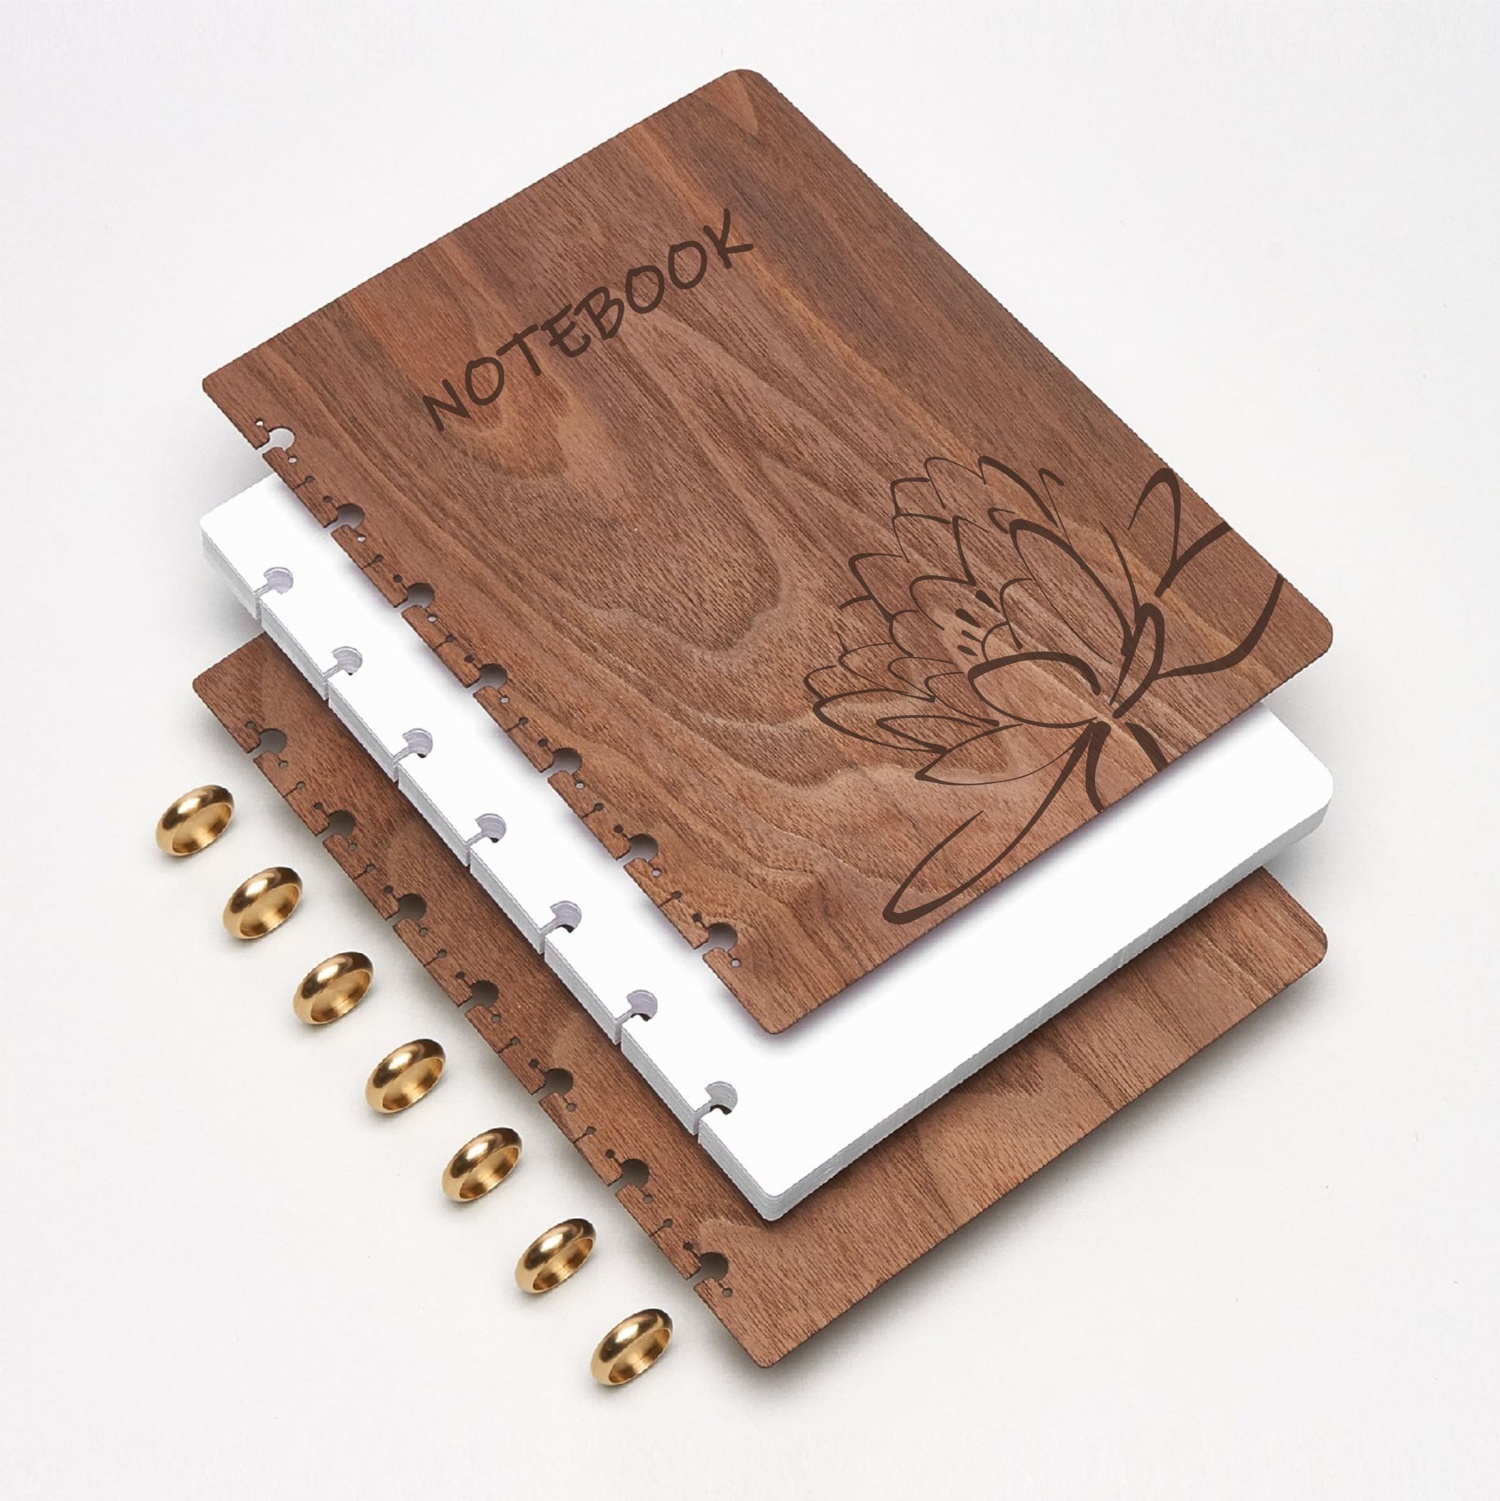 Laser Cut Wooden Notebook Cover With Lotus Flower Engraving Free Vector